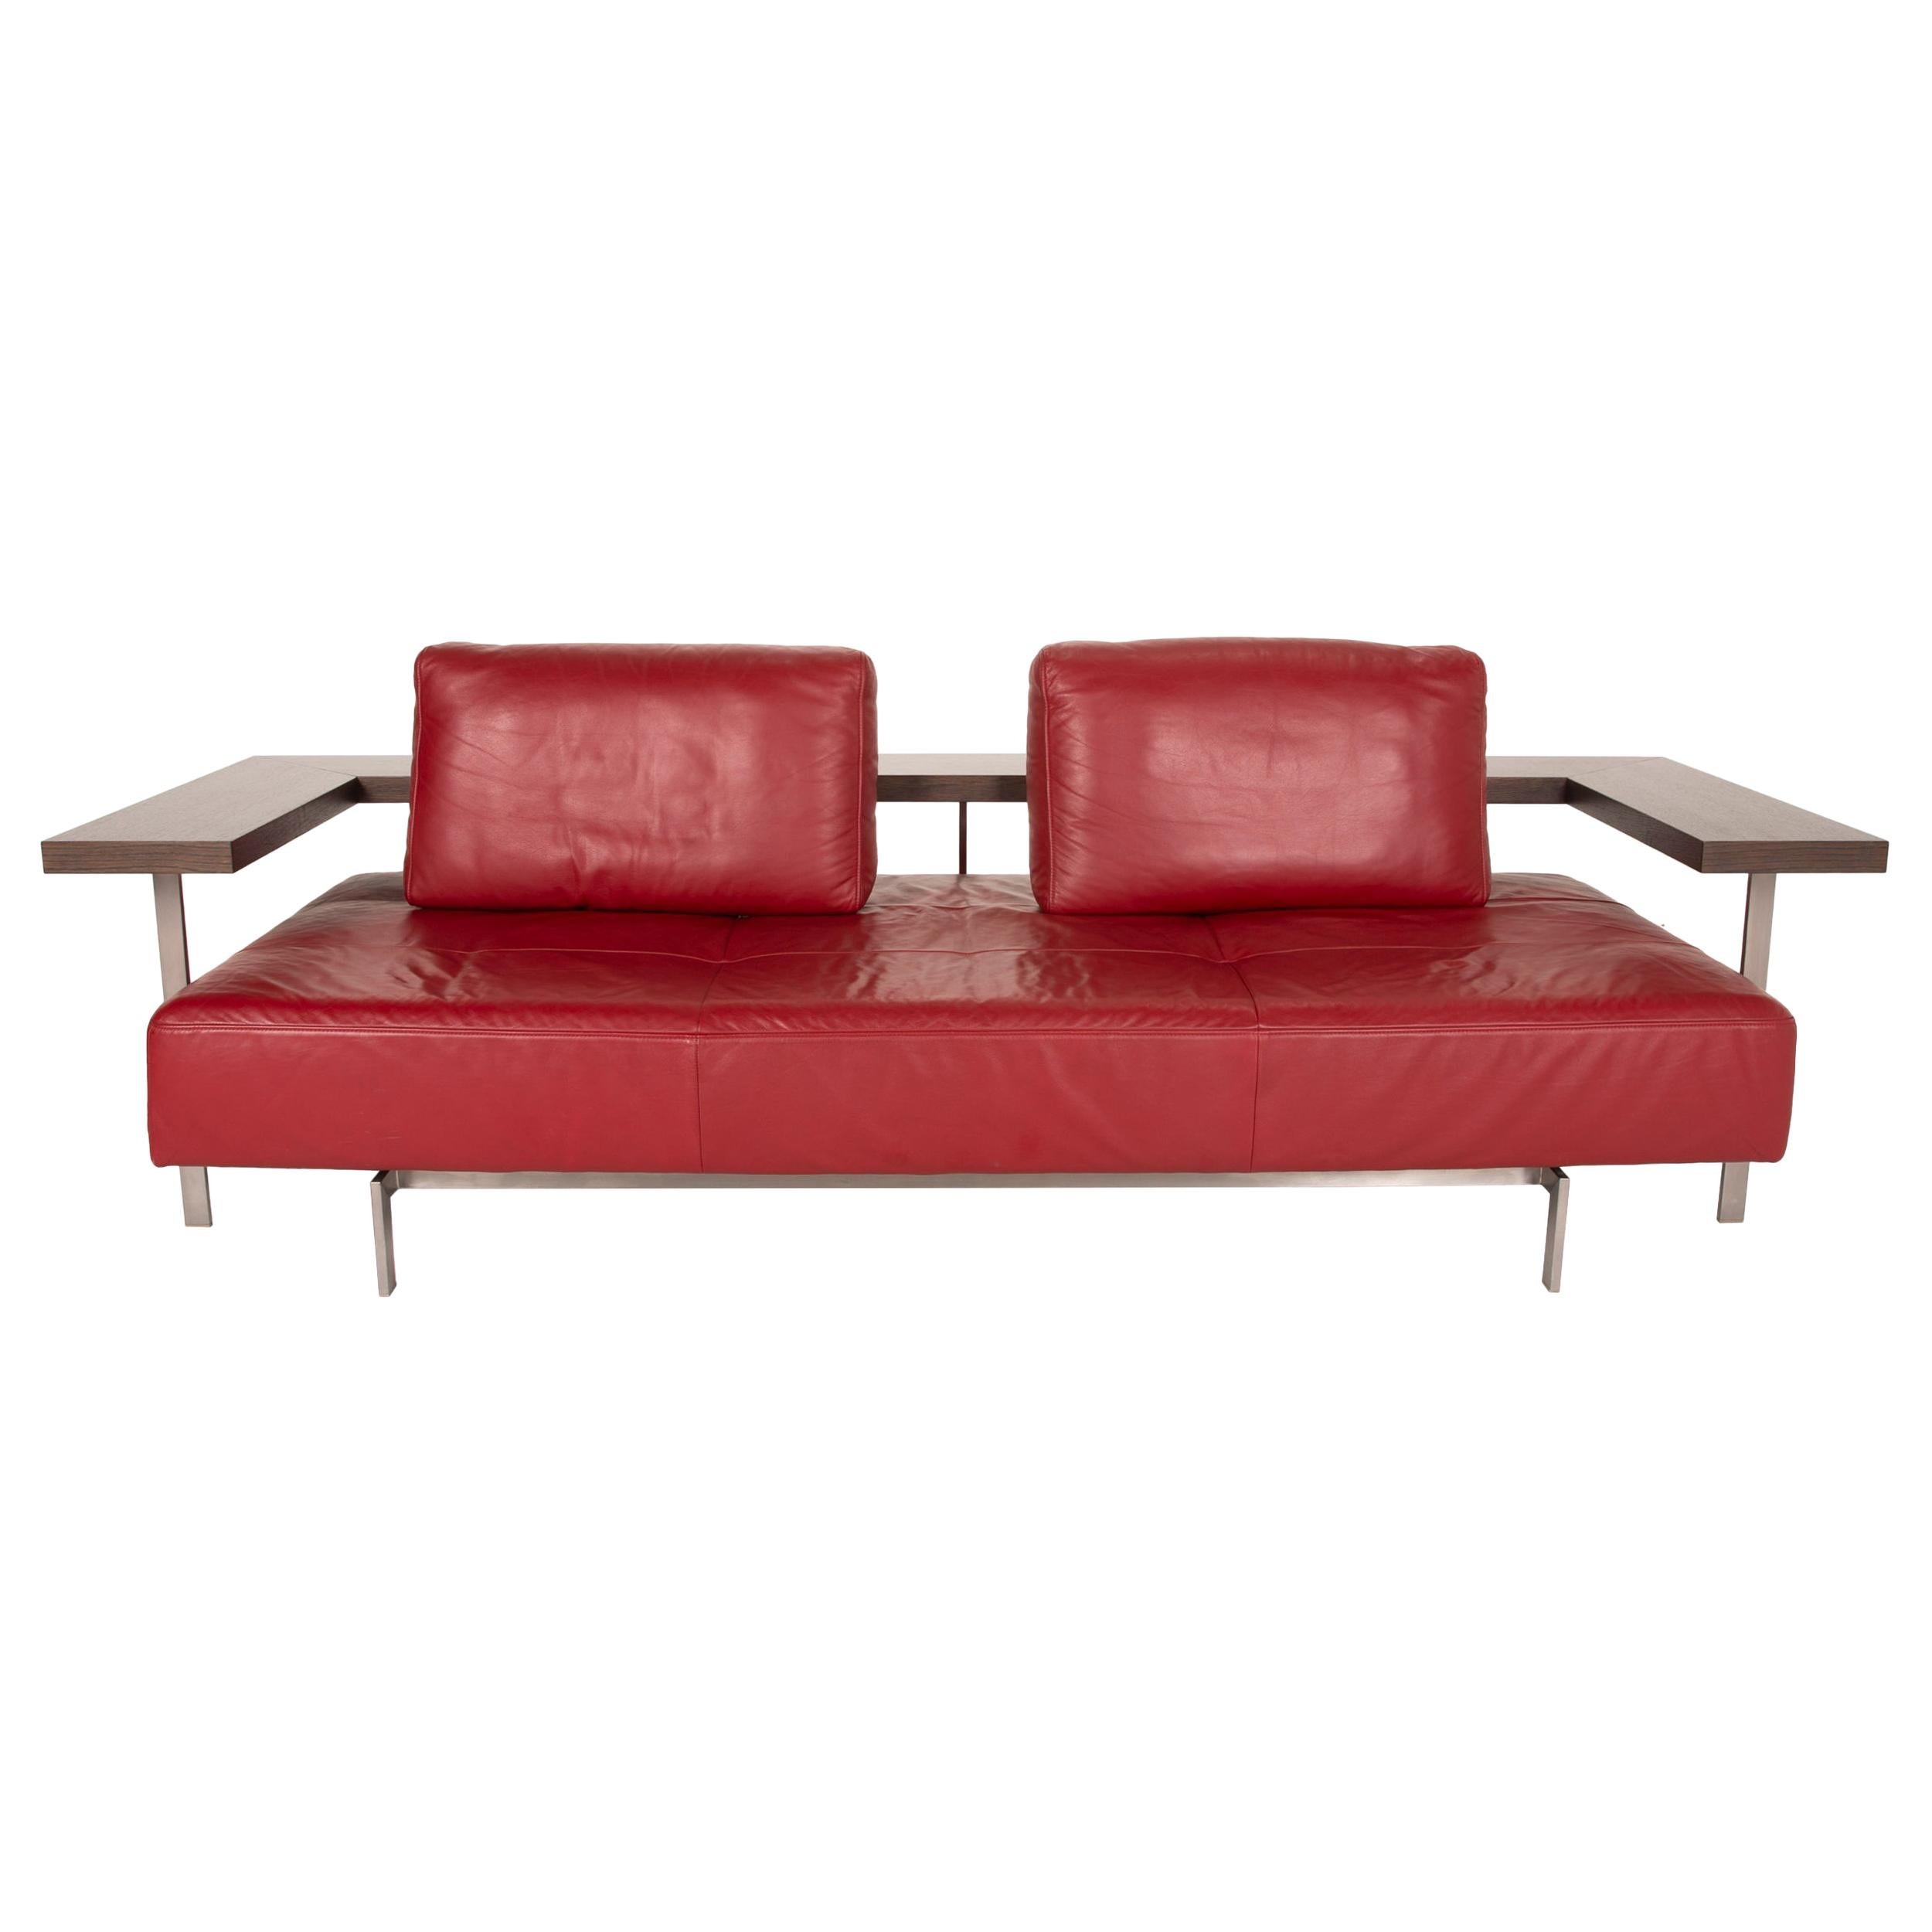 Rolf Benz Dono leather sofa red two-seater couch